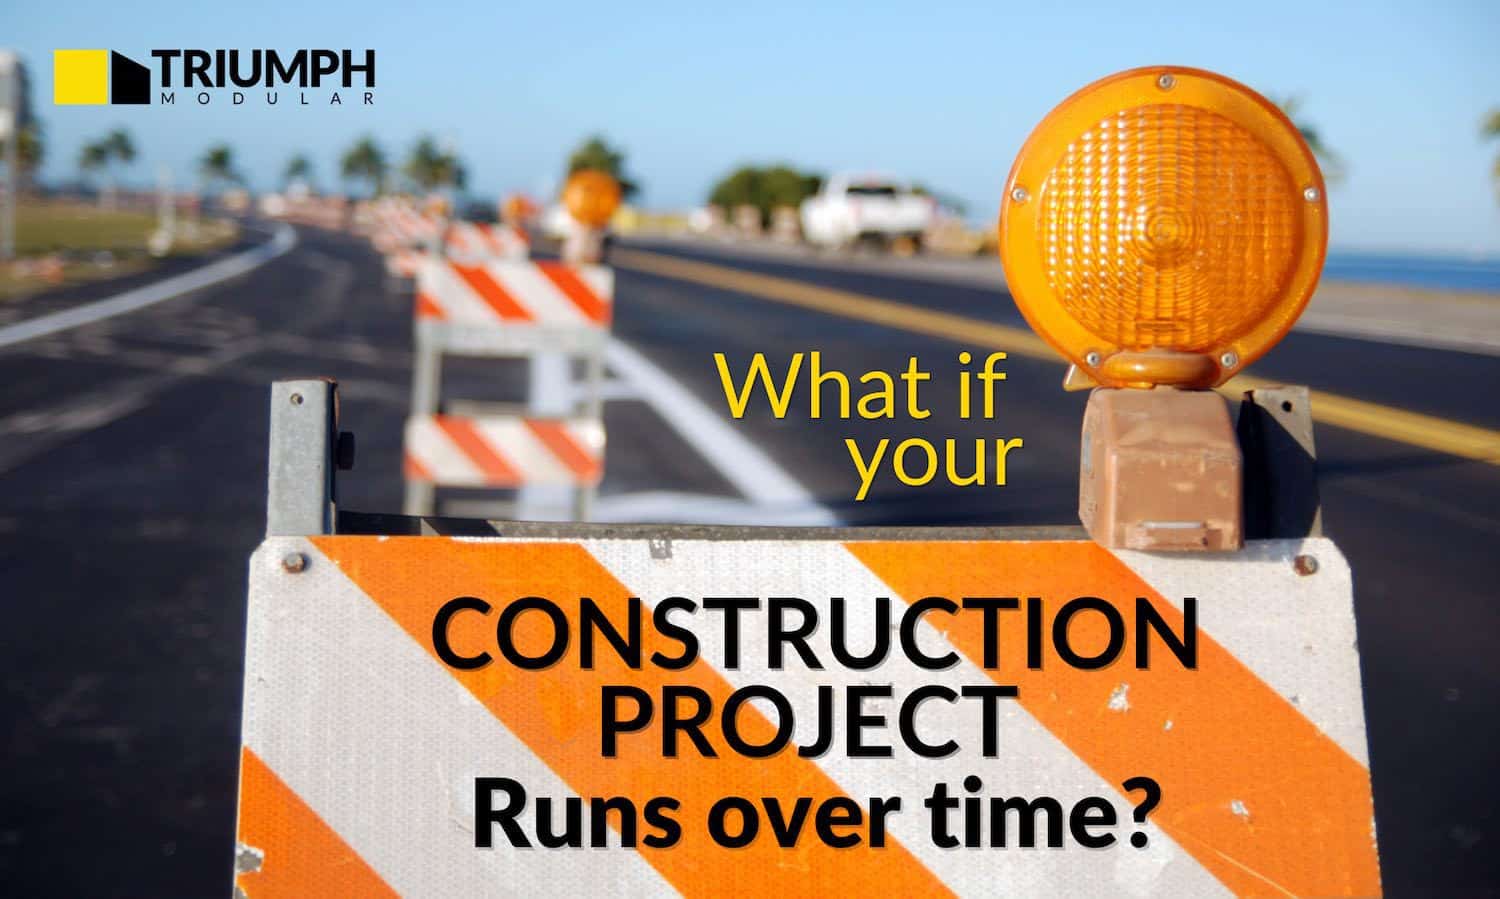 featured image for the What if your construction project runs over time article